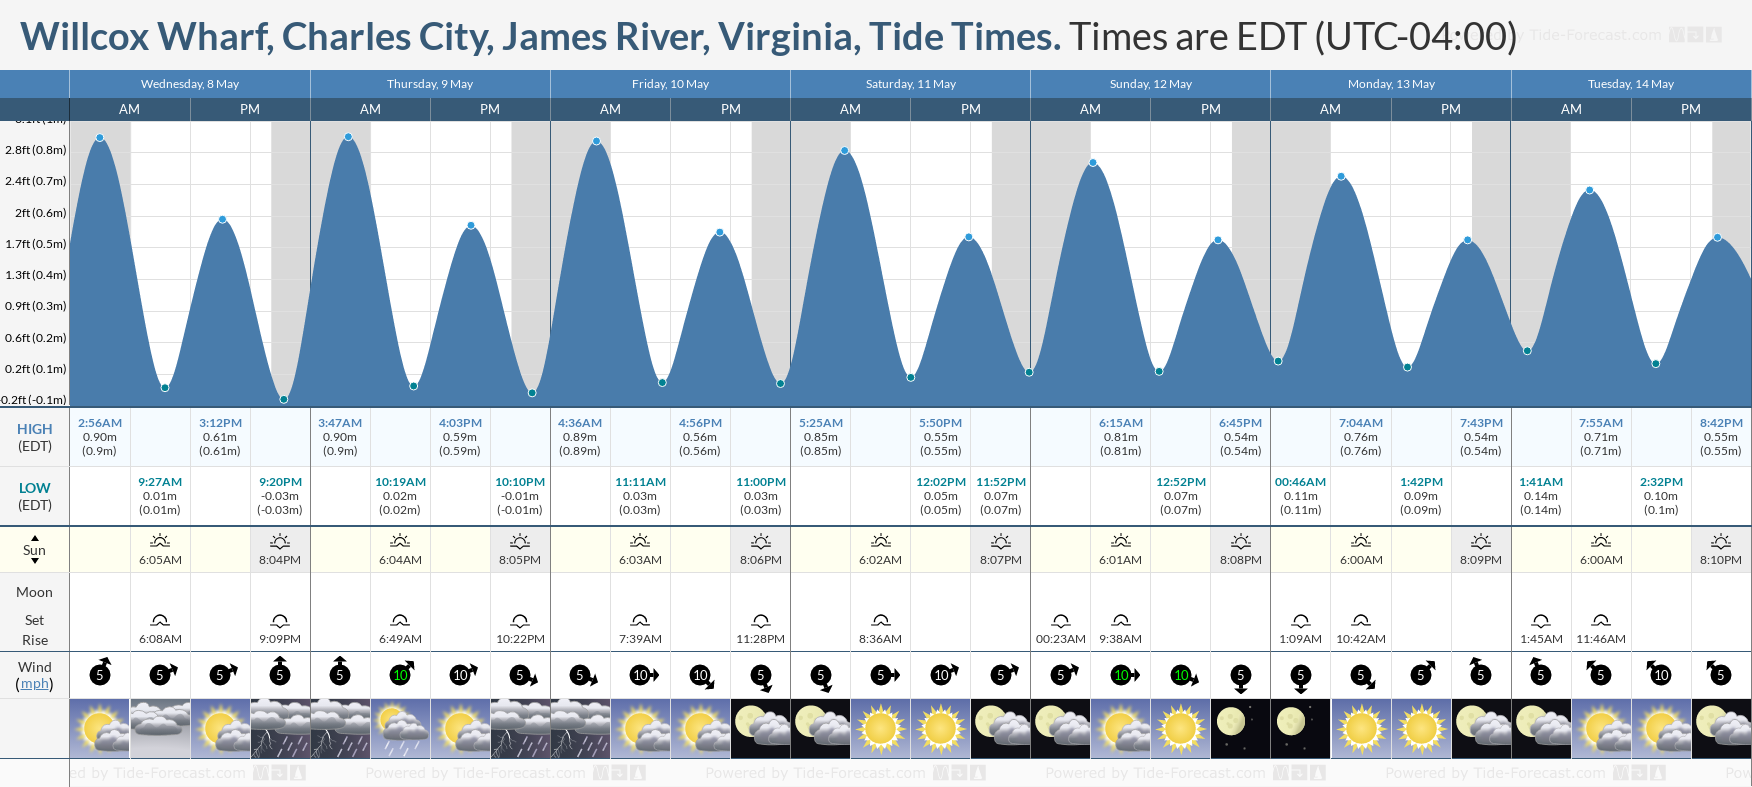 Willcox Wharf, Charles City, James River, Virginia Tide Chart including high and low tide tide times for the next 7 days